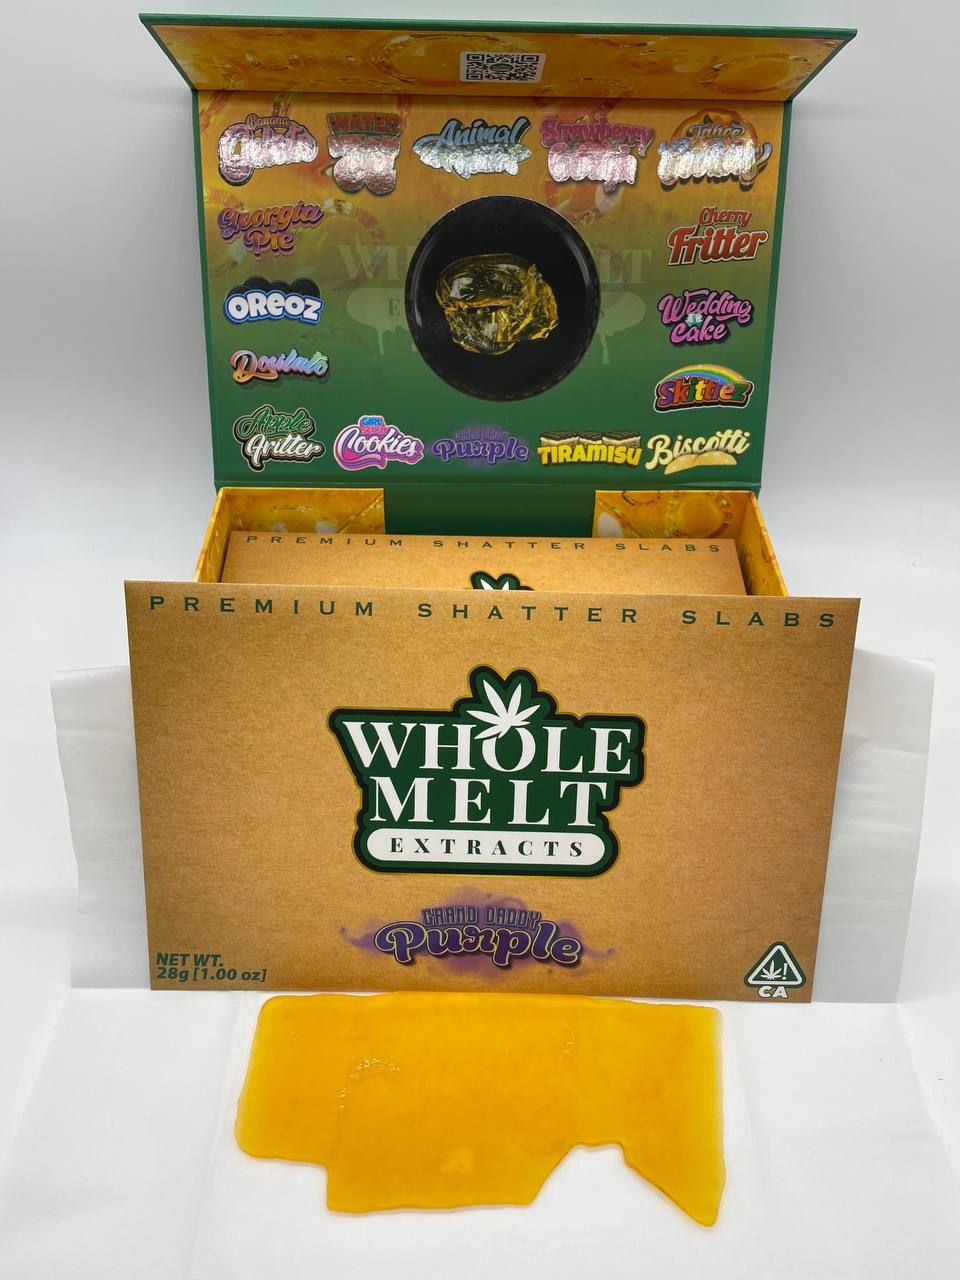 A box labeled "Import placeholder for 34" is open, displaying a golden shatter slab in front. The box features various strain names in colorful fonts on the inner lid, while the front of the box includes "Paris OG x Purple" with a cannabis leaf logo.